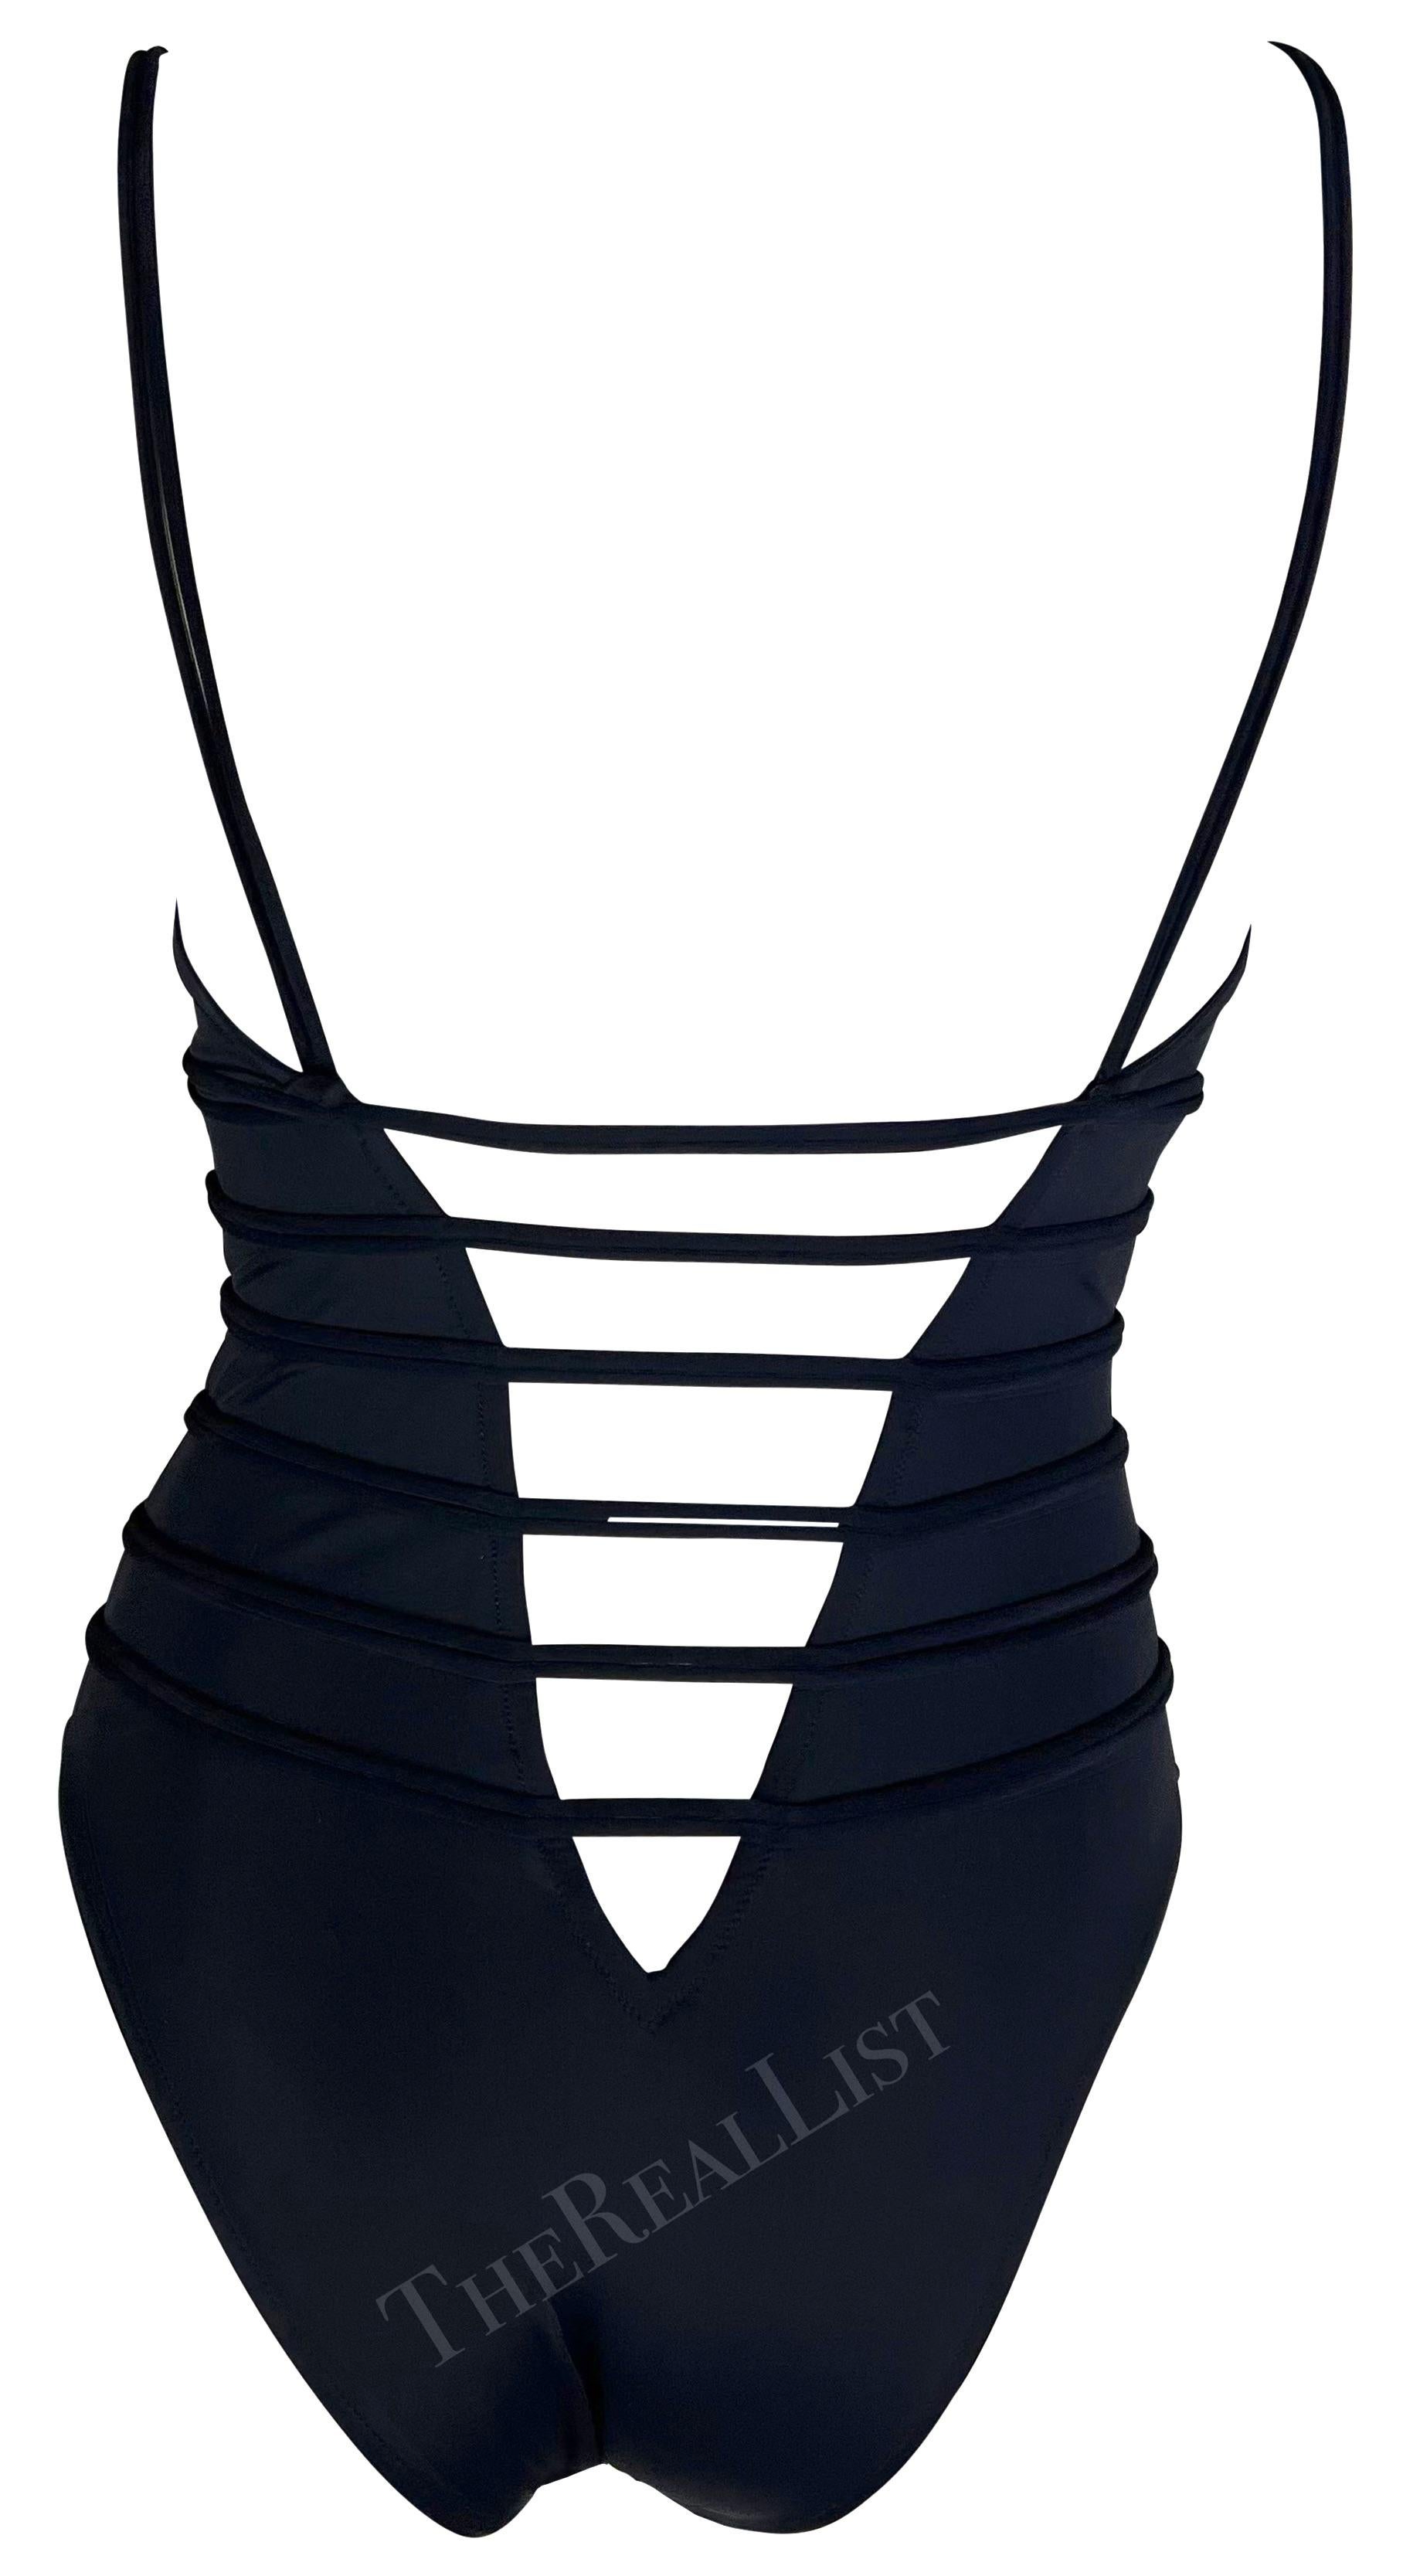 S/S 1995 Fendi by Karl Lagerfeld Runway Plunging Cord One-Piece Navy Swimsuit For Sale 1